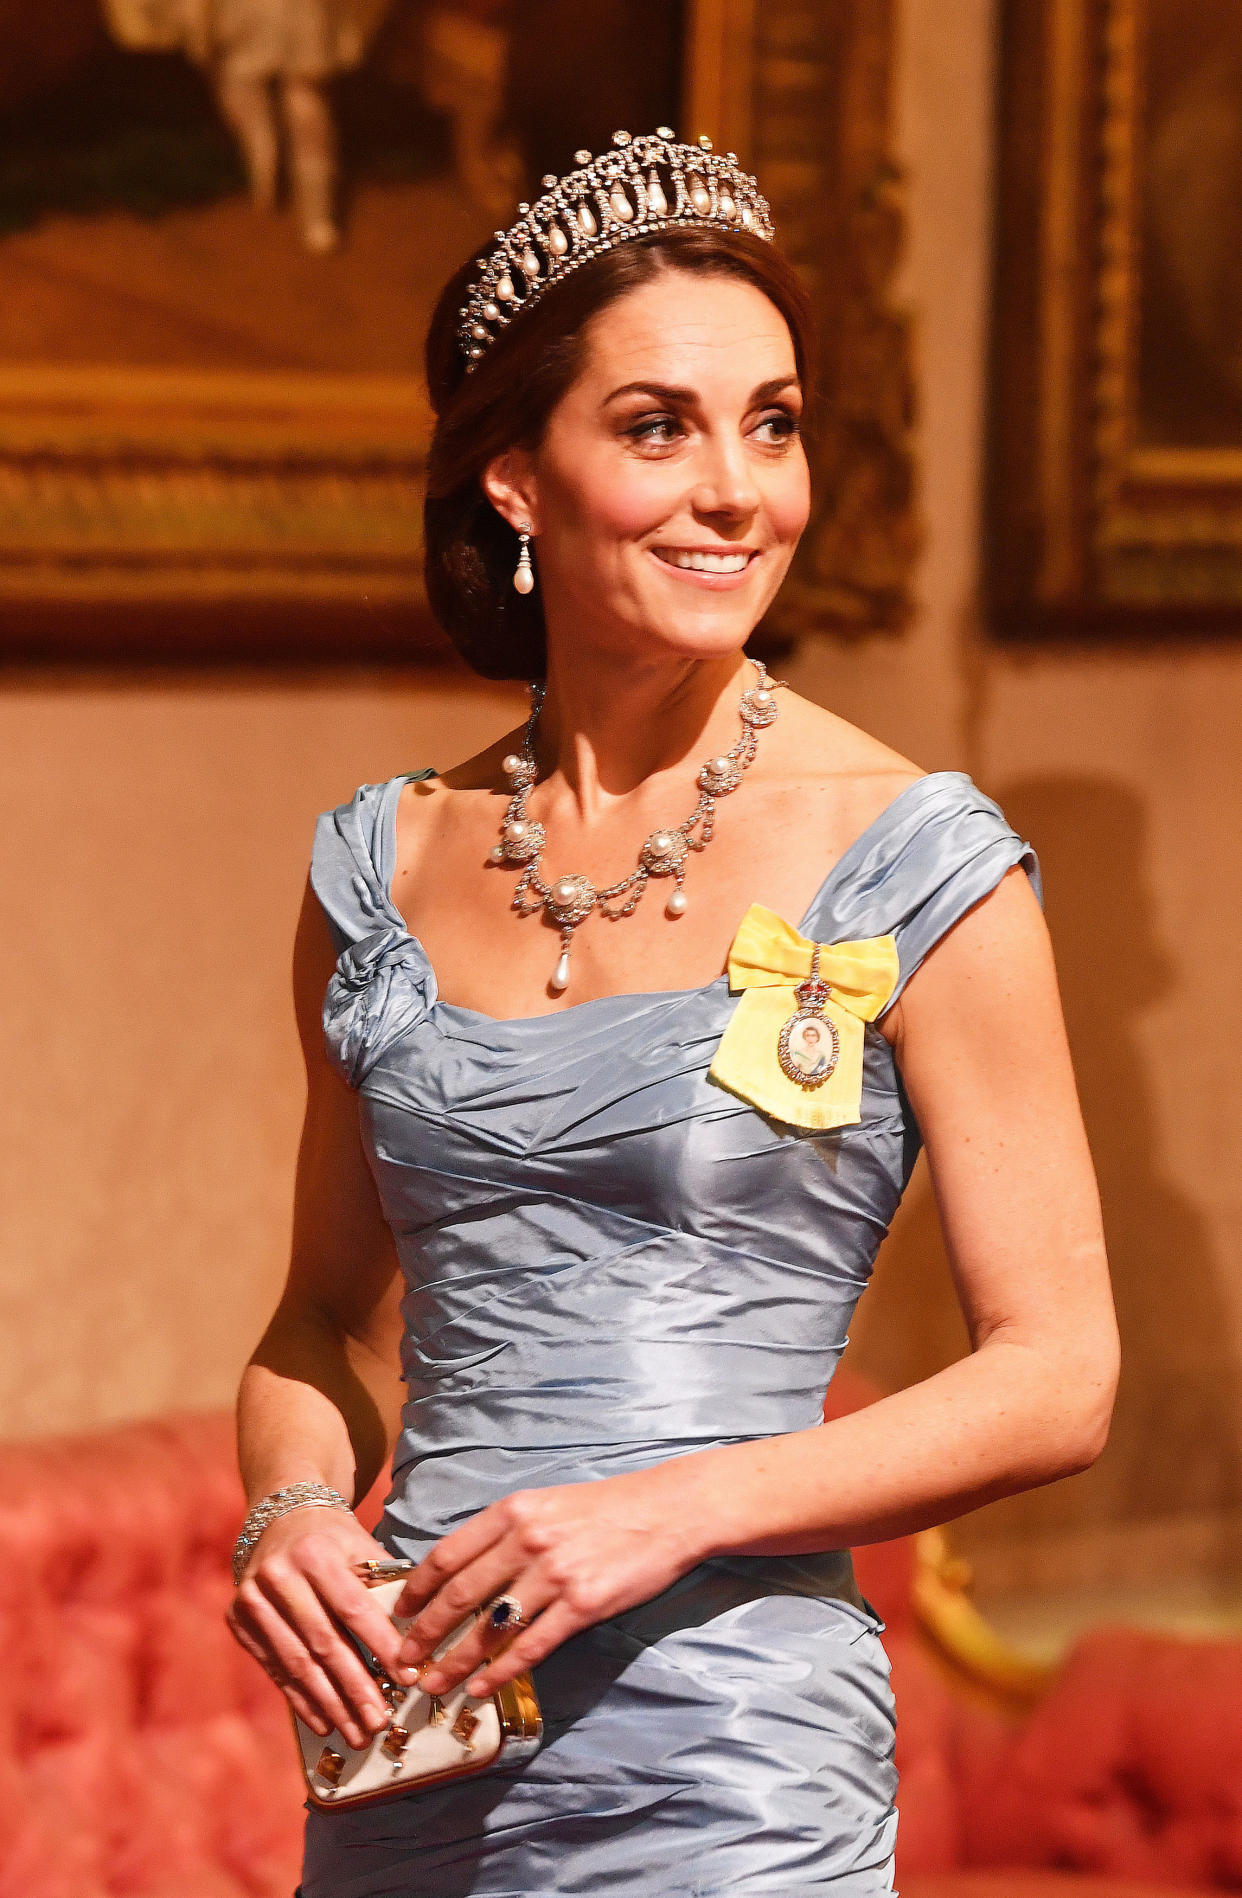 There’s a special meaning behind the Duchess of Cambridge’s brooch she wore on Tuesday night. Source: Getty